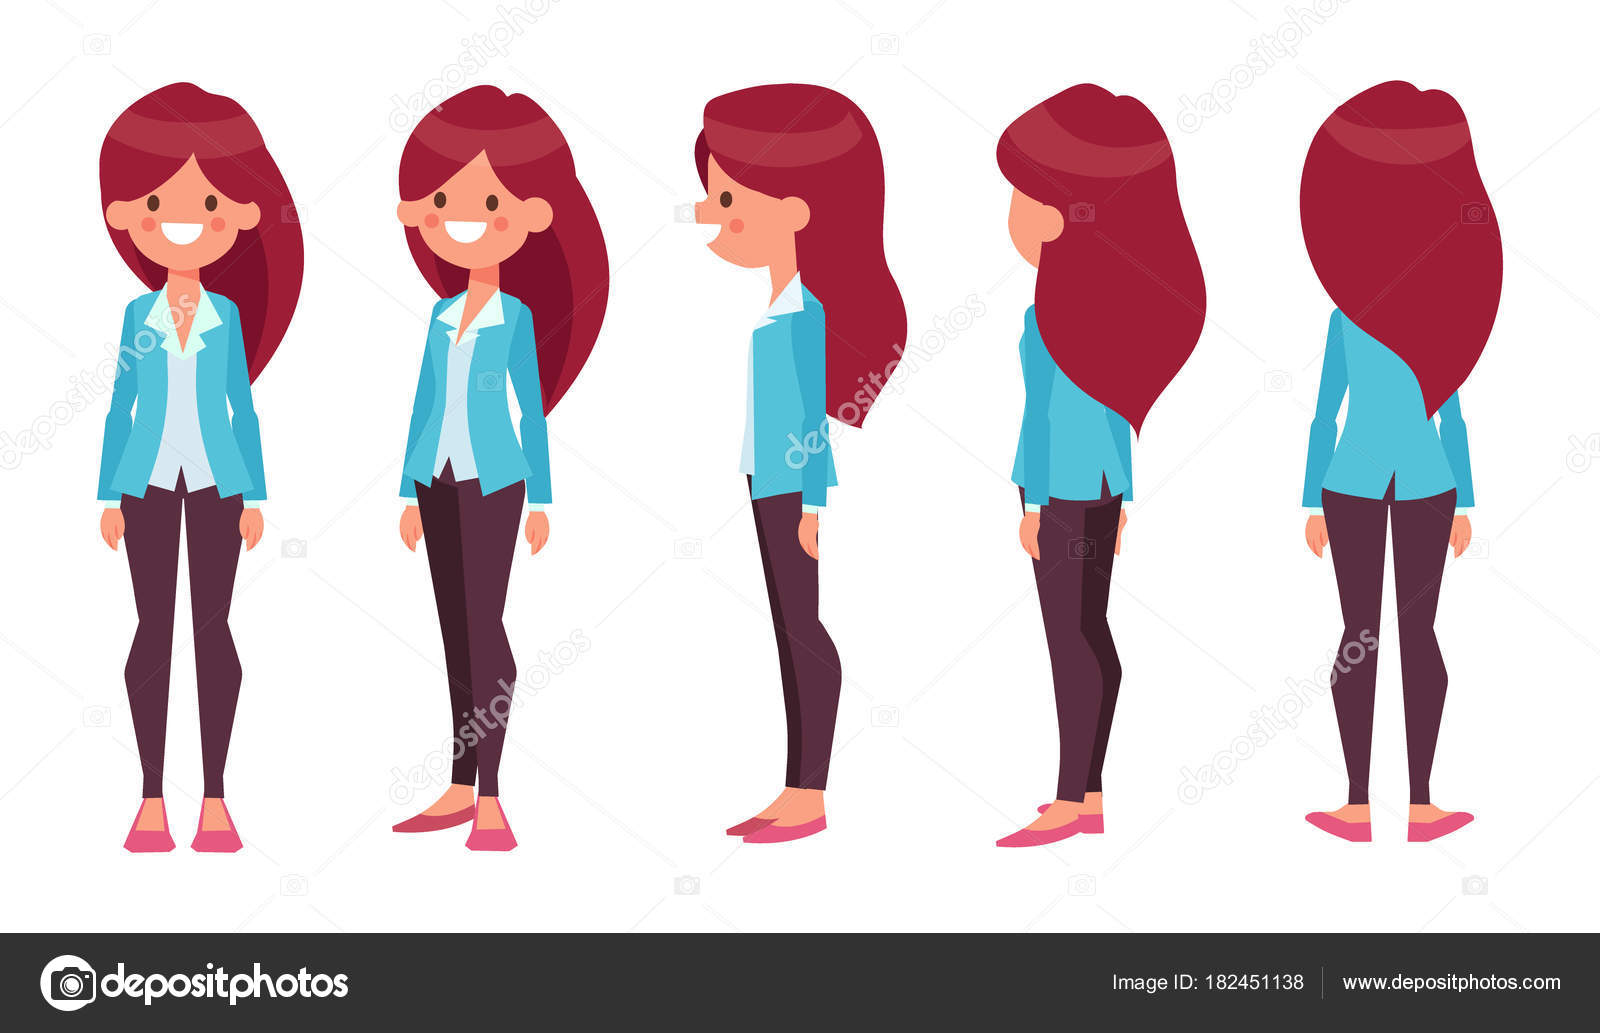 4+ Thousand Cute Cartoon Girl Side View Royalty-Free Images, Stock Photos &  Pictures